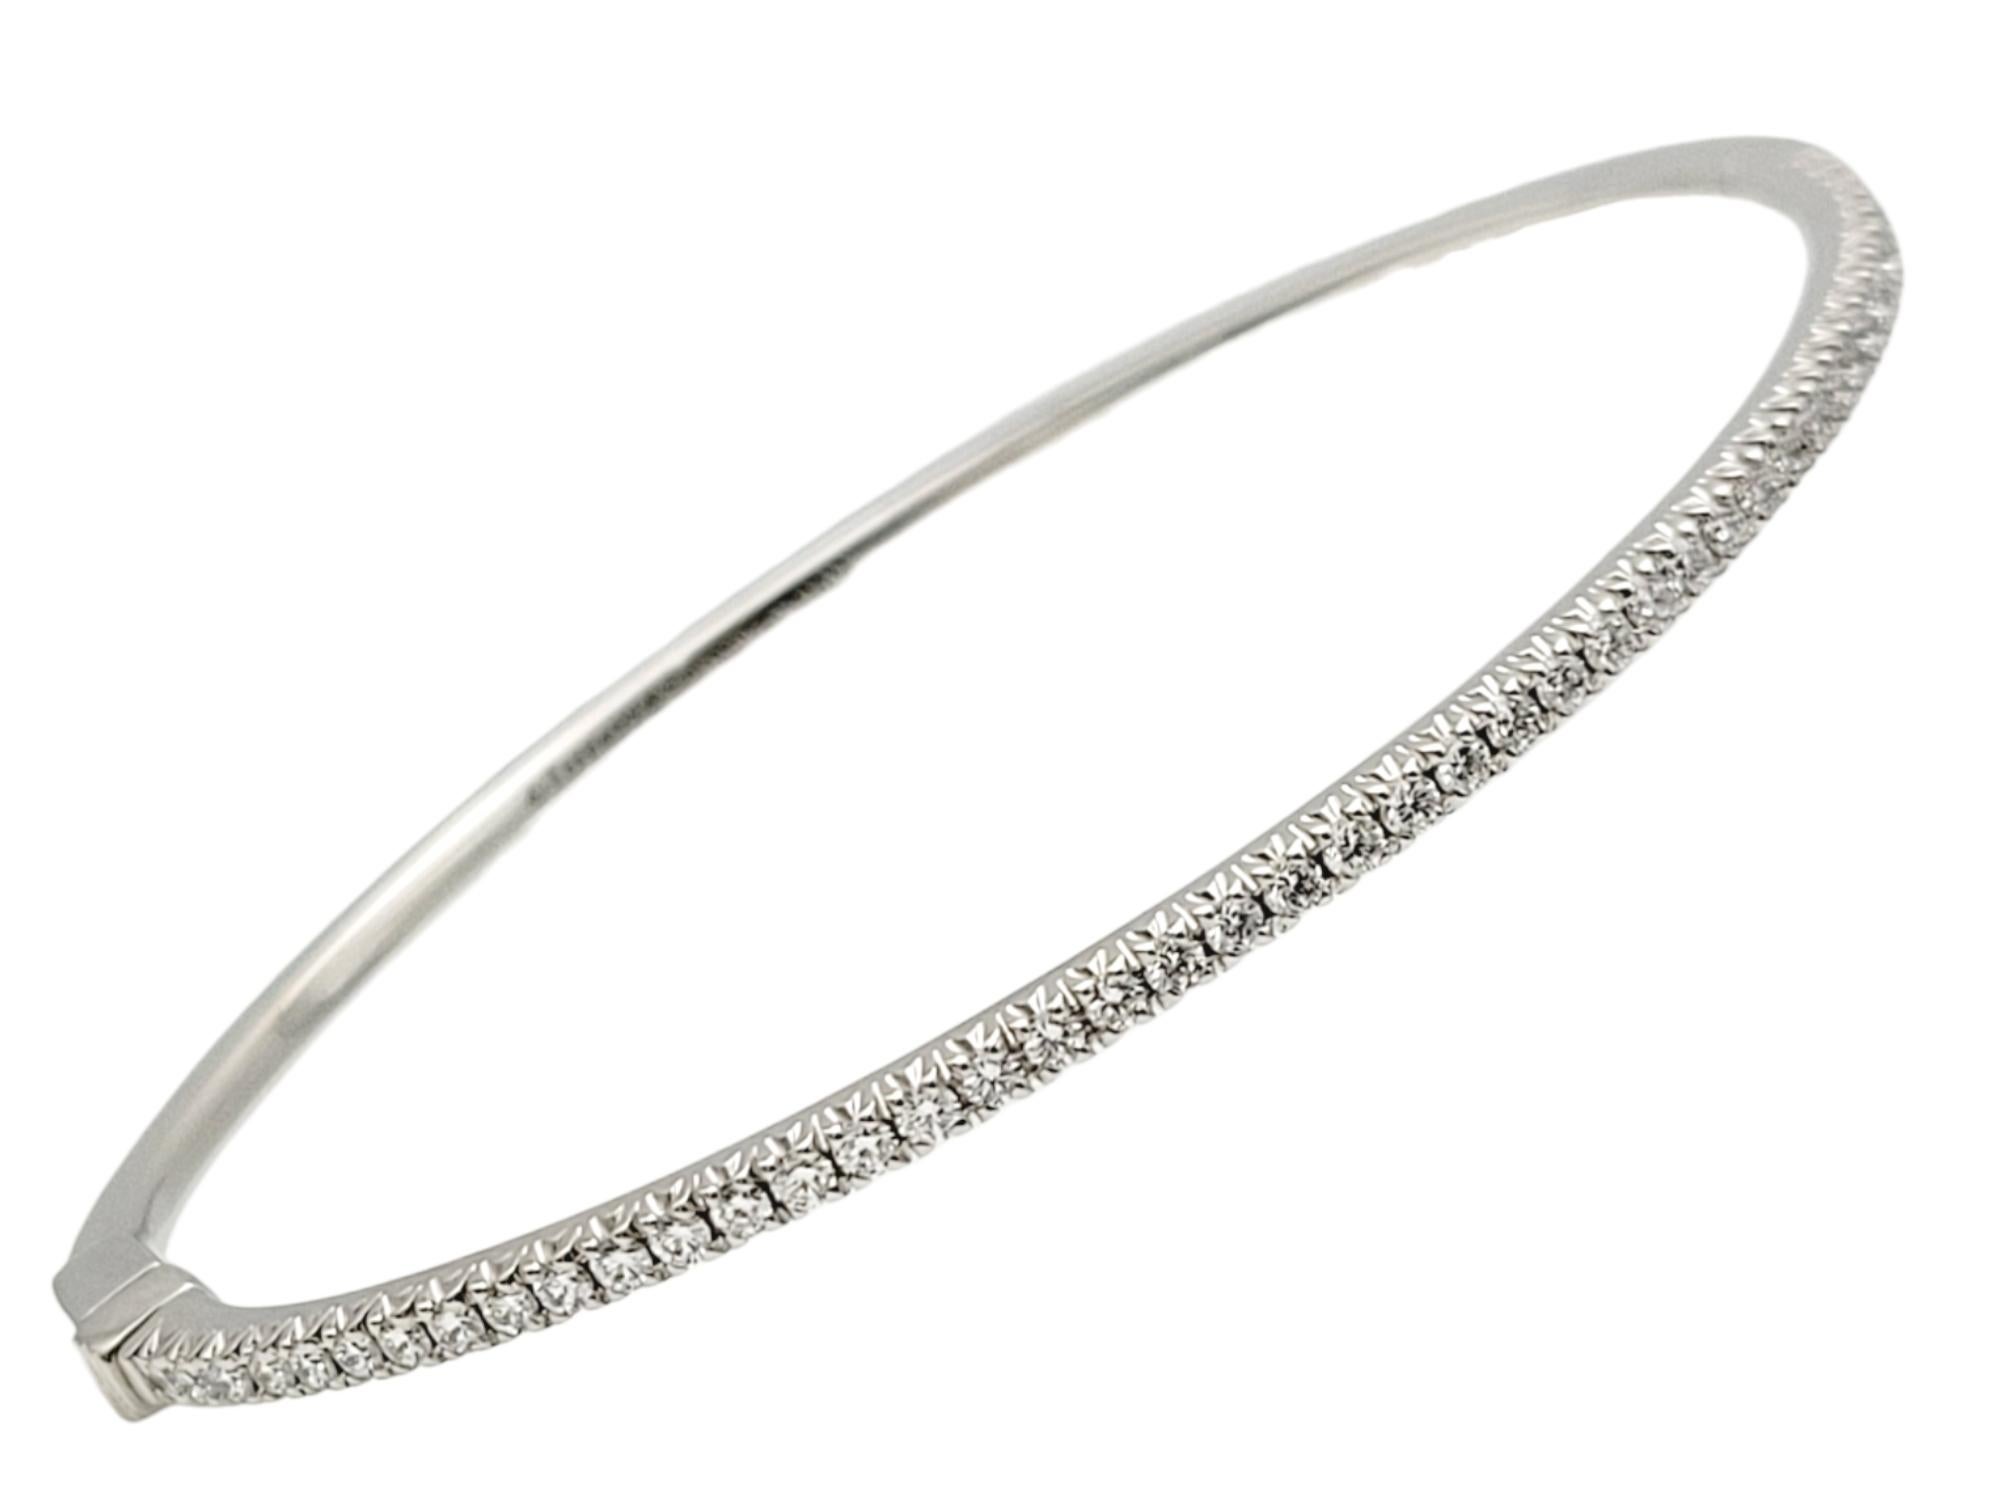 This gorgeous Tiffany & Co. diamond bangle bracelet is a stunning piece from the renowned Tiffany Metro Collection. This bangle exudes a streamlined, modern design reminiscent of a twinkling nighttime city skyline. It is the epitome of elegance,